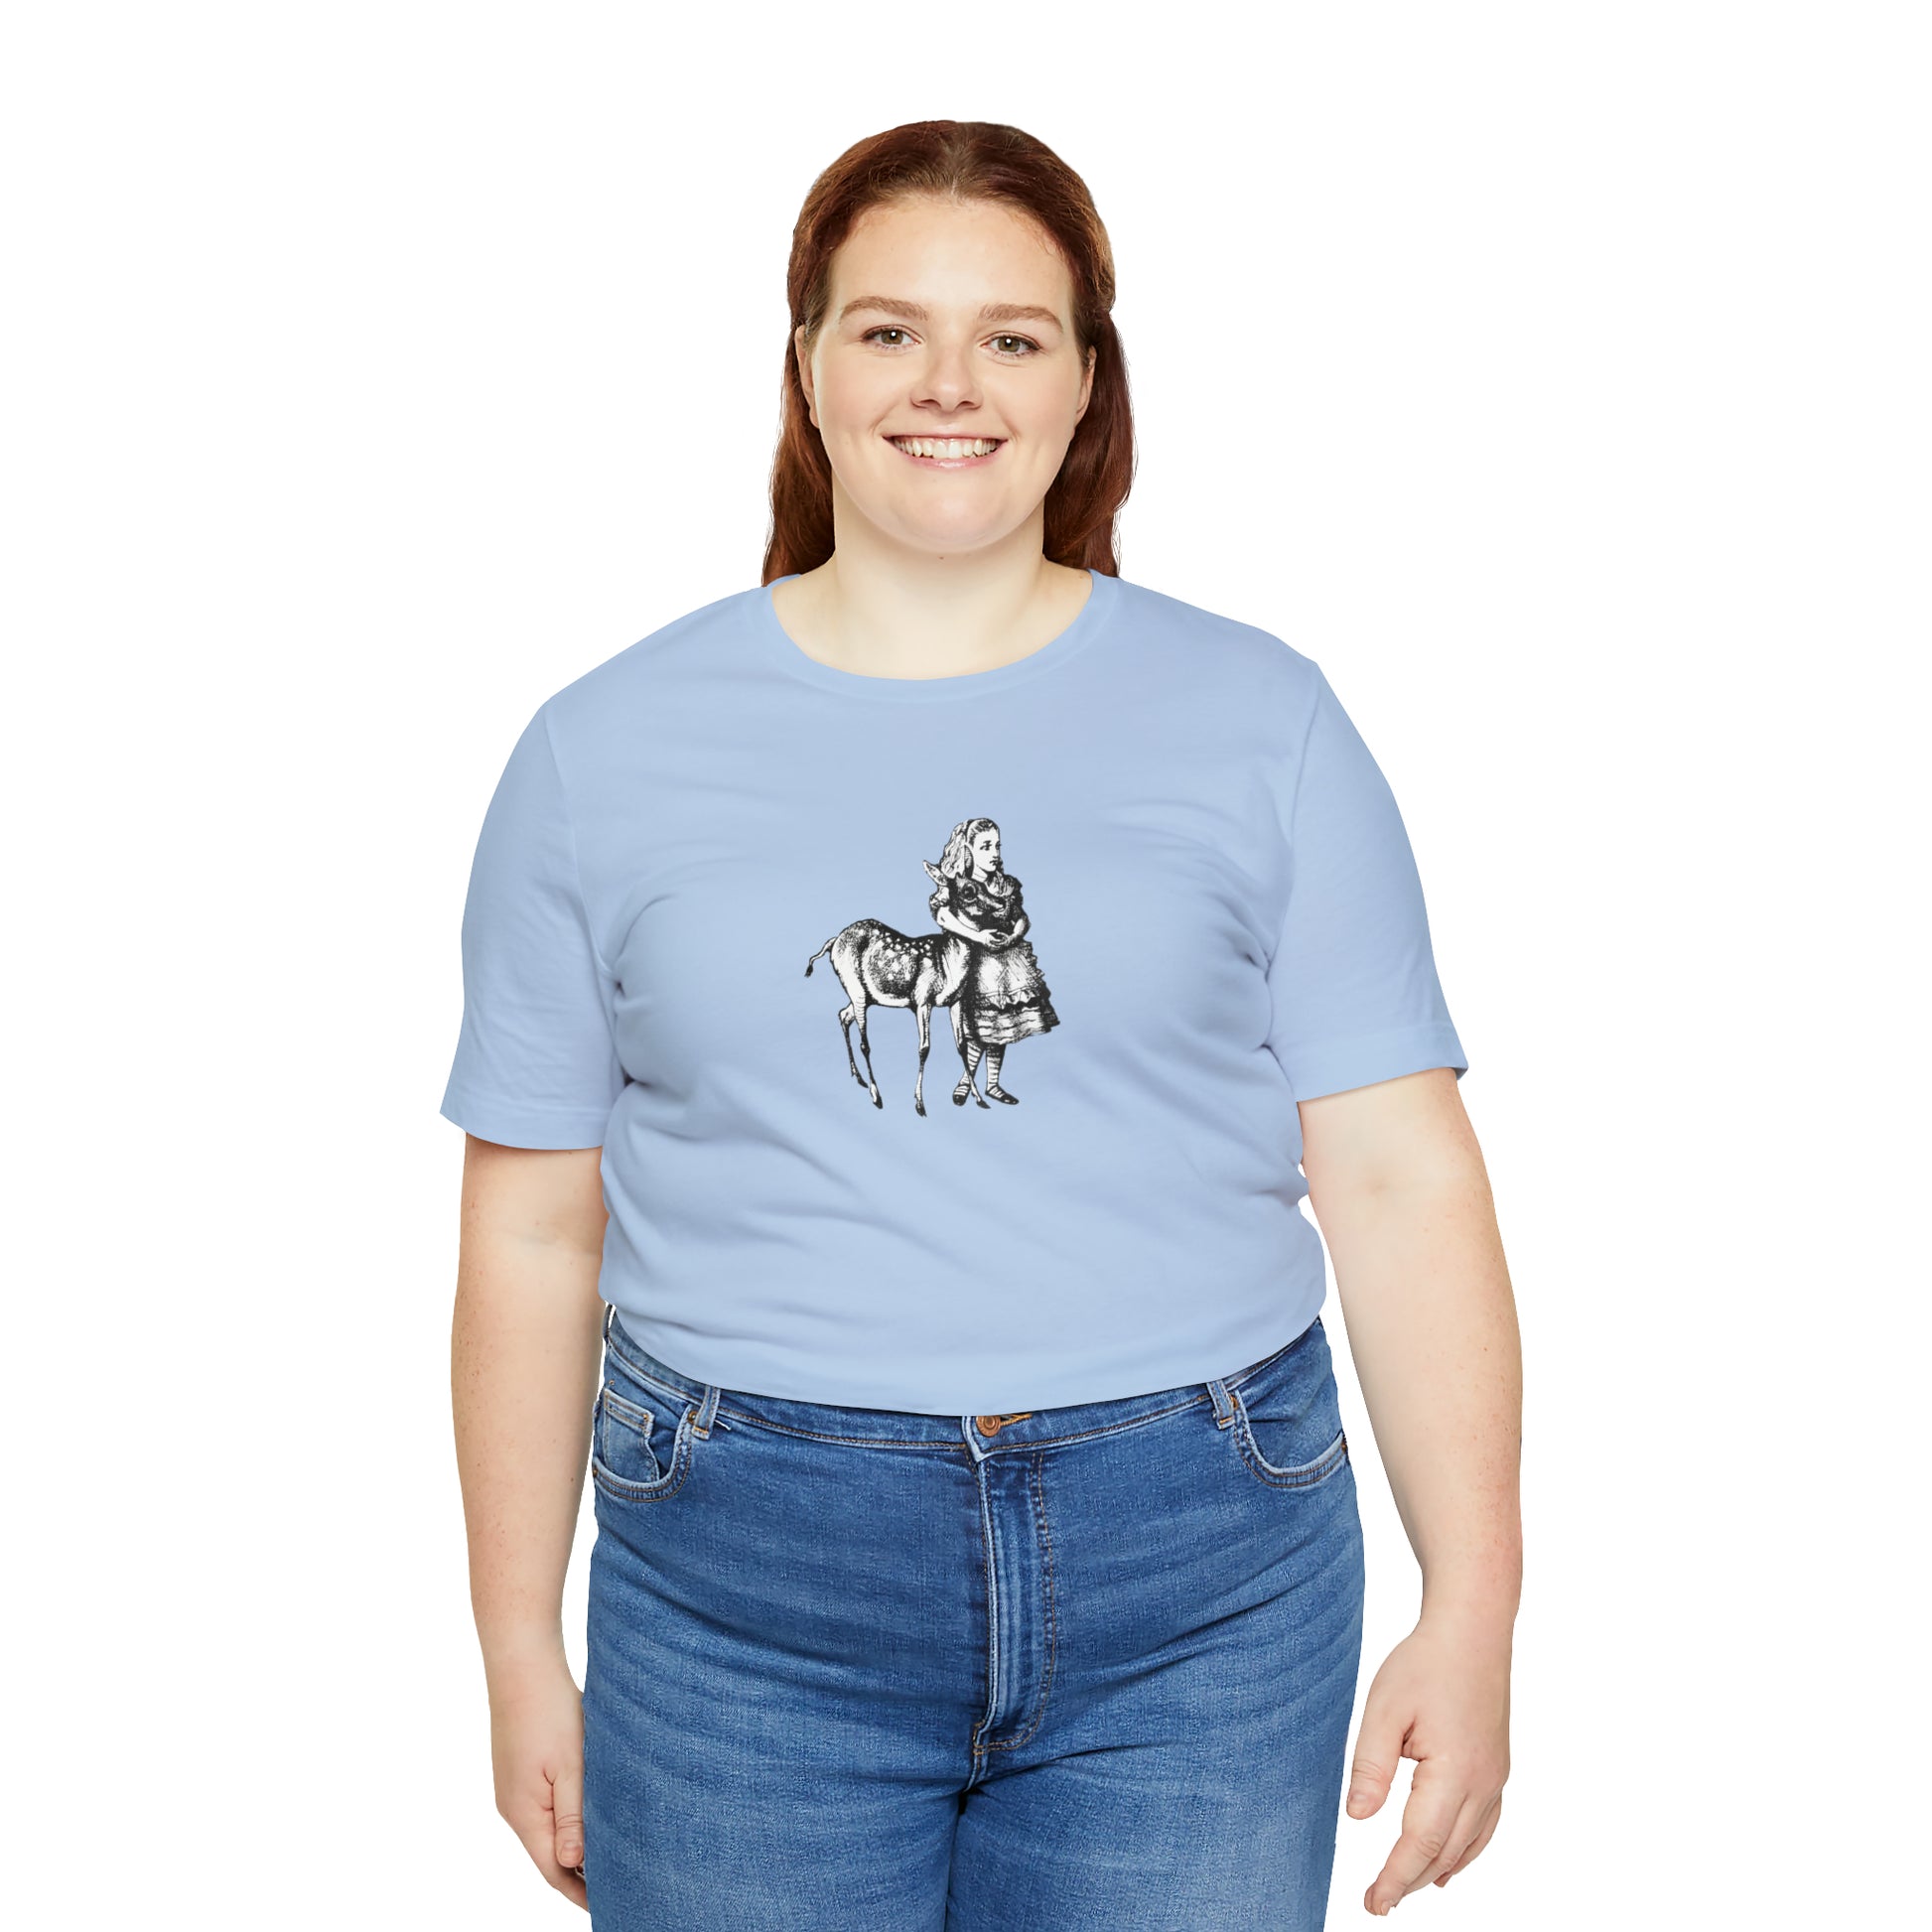 A smiling plus sized woman wearing a light blue t-shirt with an illustration of Alice in Wonderland and a baby deer printed in black.